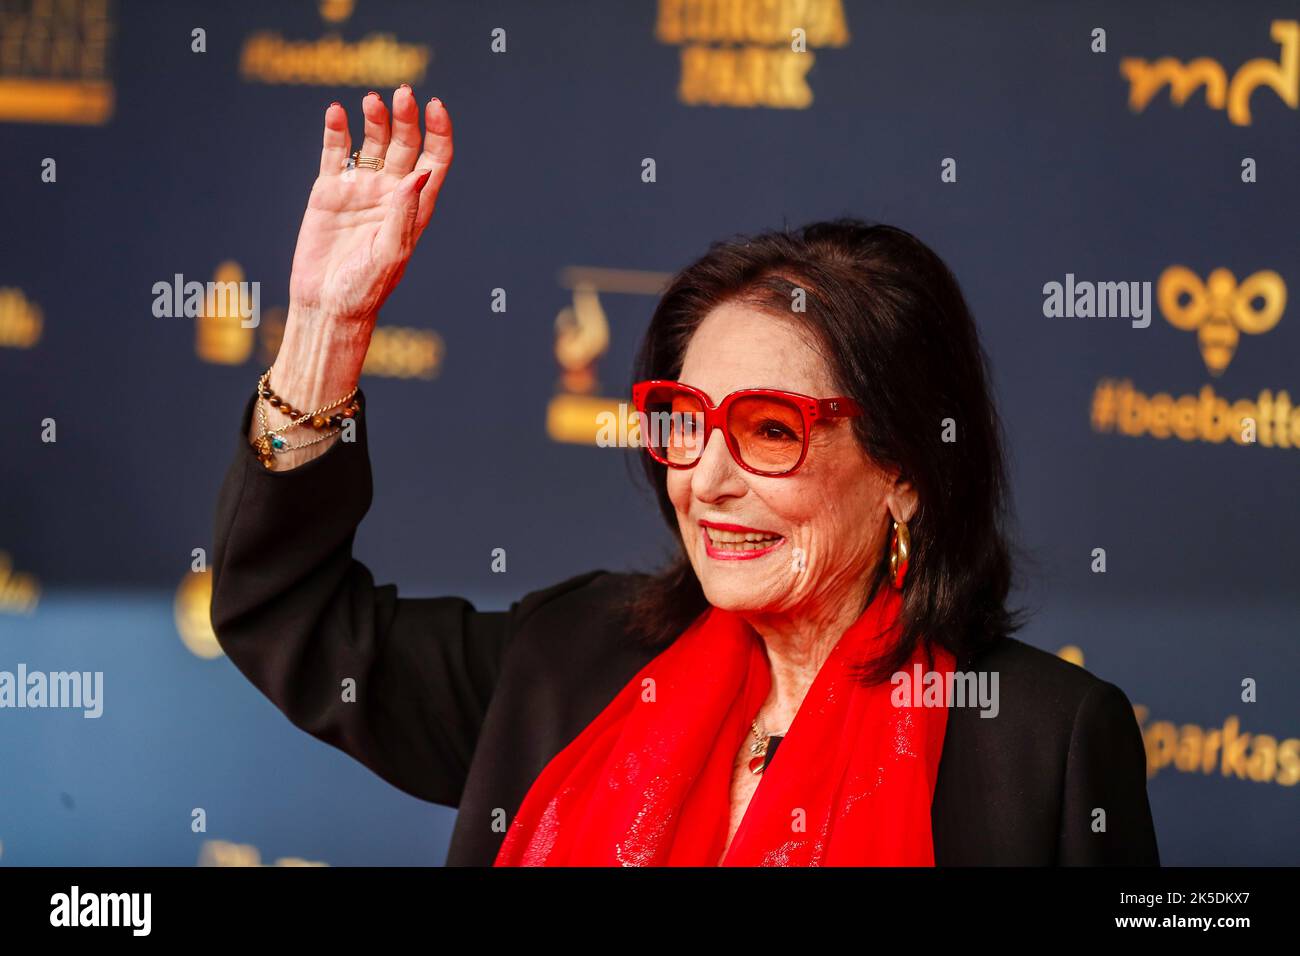 Leipzig, Germany. 07th Oct, 2022. Nana Mouskouri is coming to the 'Goldene Henne' media award ceremony in Leipzig. The award is given to stars from music, sports and show business. Credit: Gerald Matzka/dpa/Alamy Live News Stock Photo